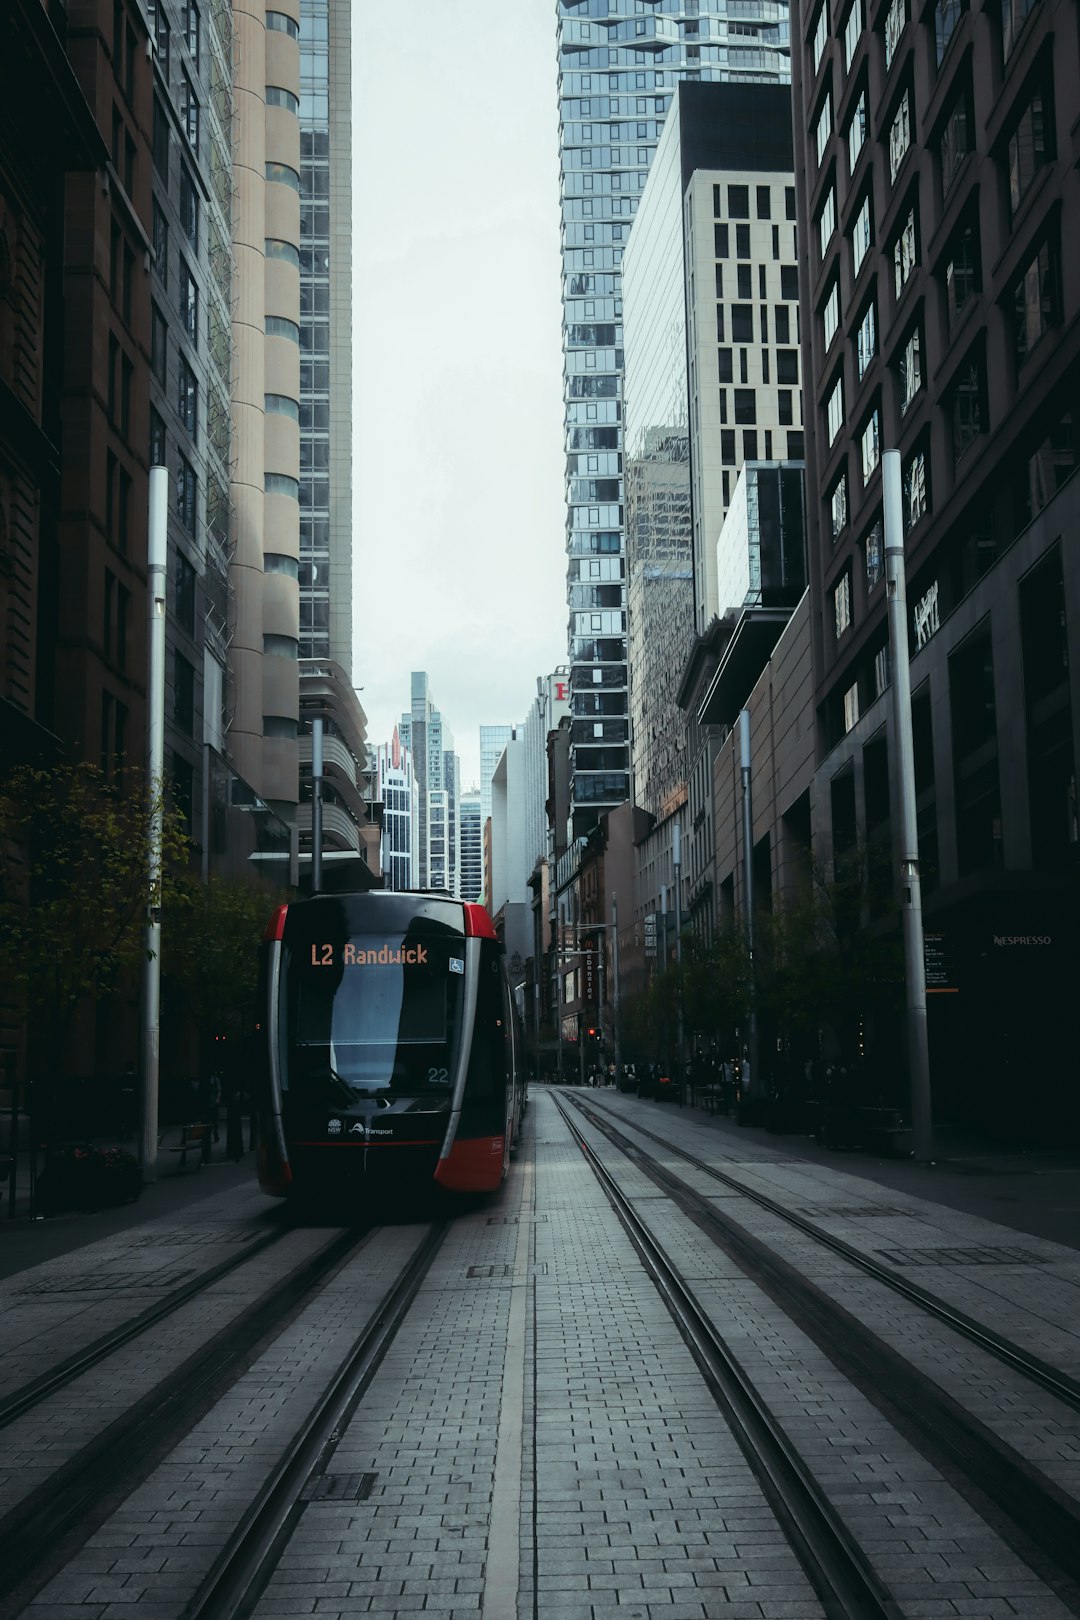 black and white tram on road between high rise buildings during daytime